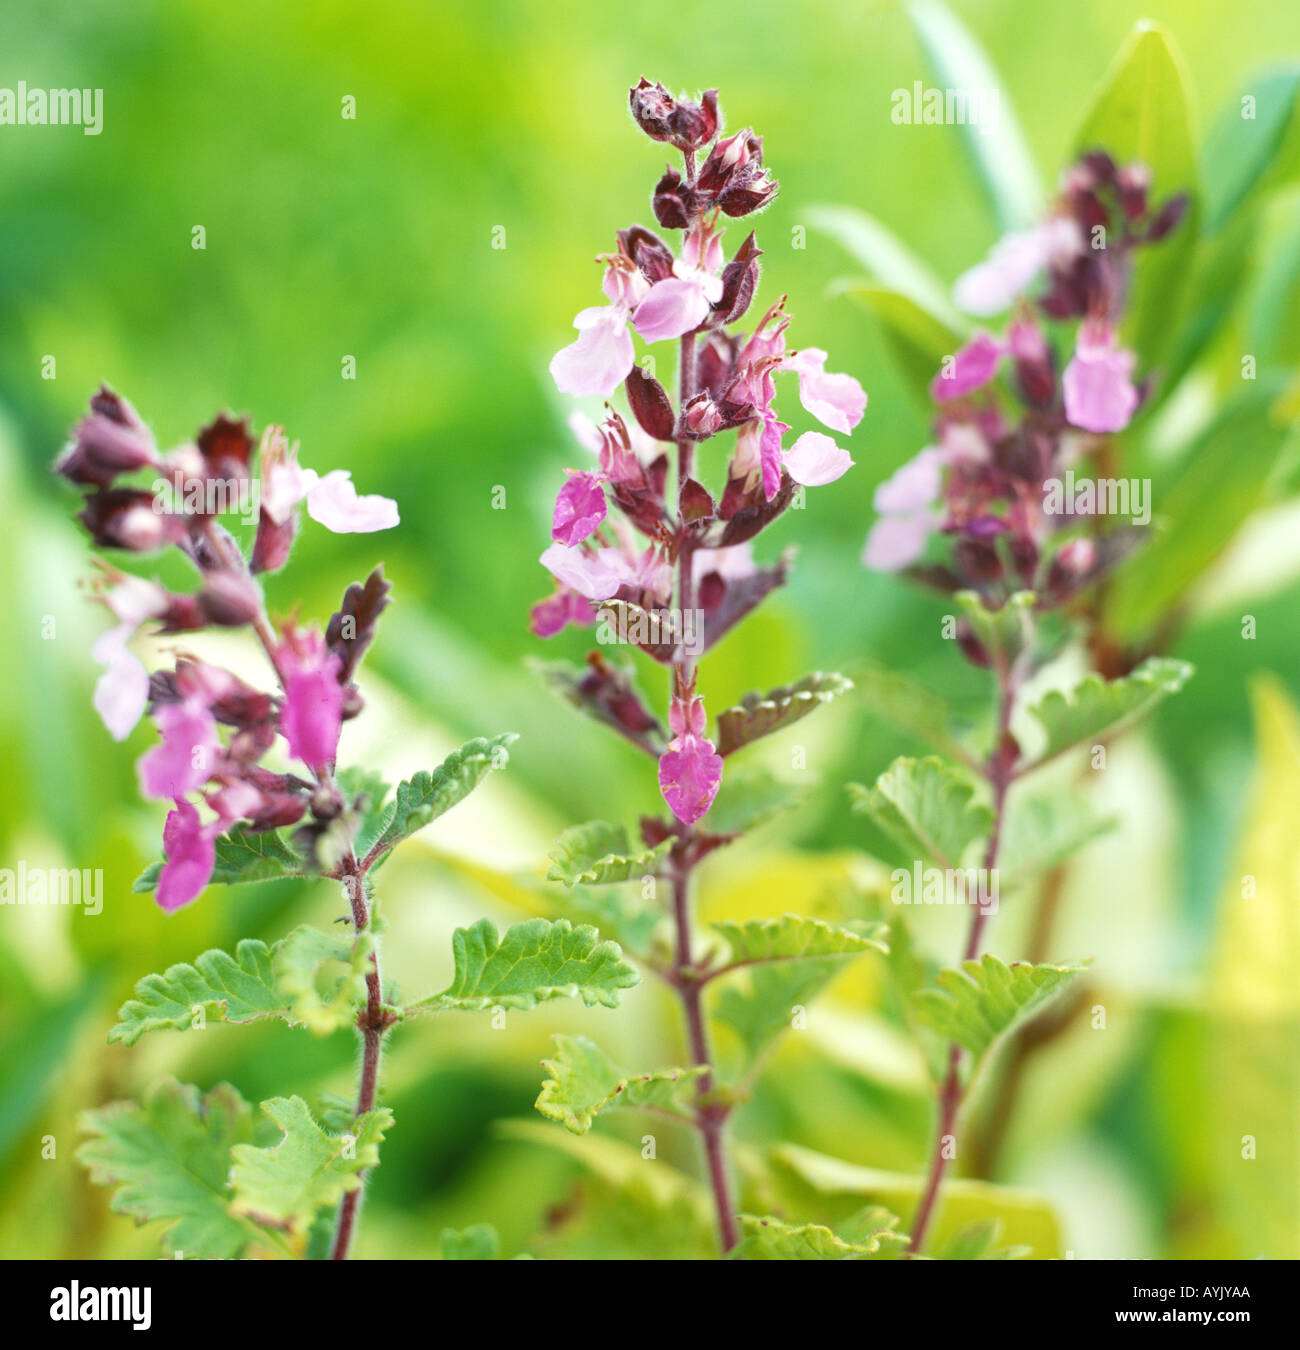 Teucrium chamaedrys L., focus on wall germander, pink flowers and oval, pointed, toothed, and lobed leaves, Stock Photo